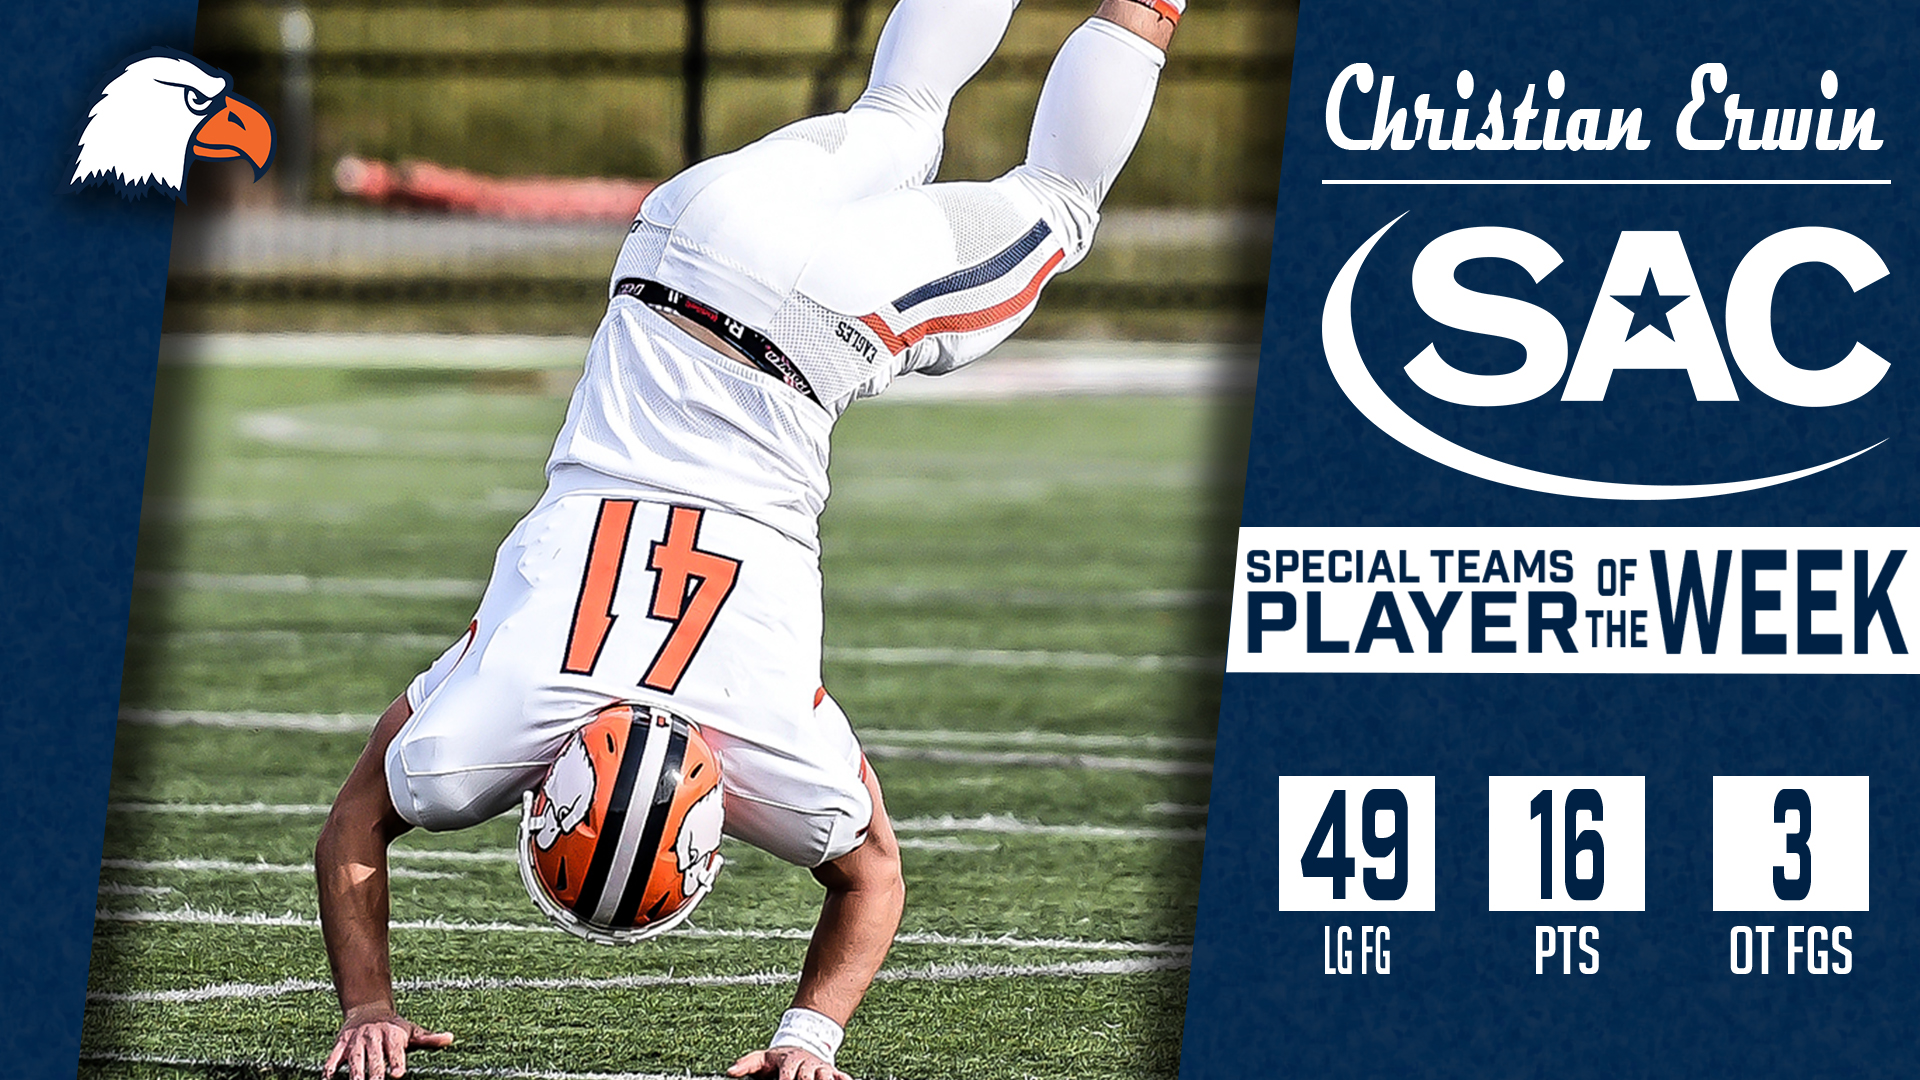 Erwin boots way to AstroTurf SAC Special Teams Player of the Week